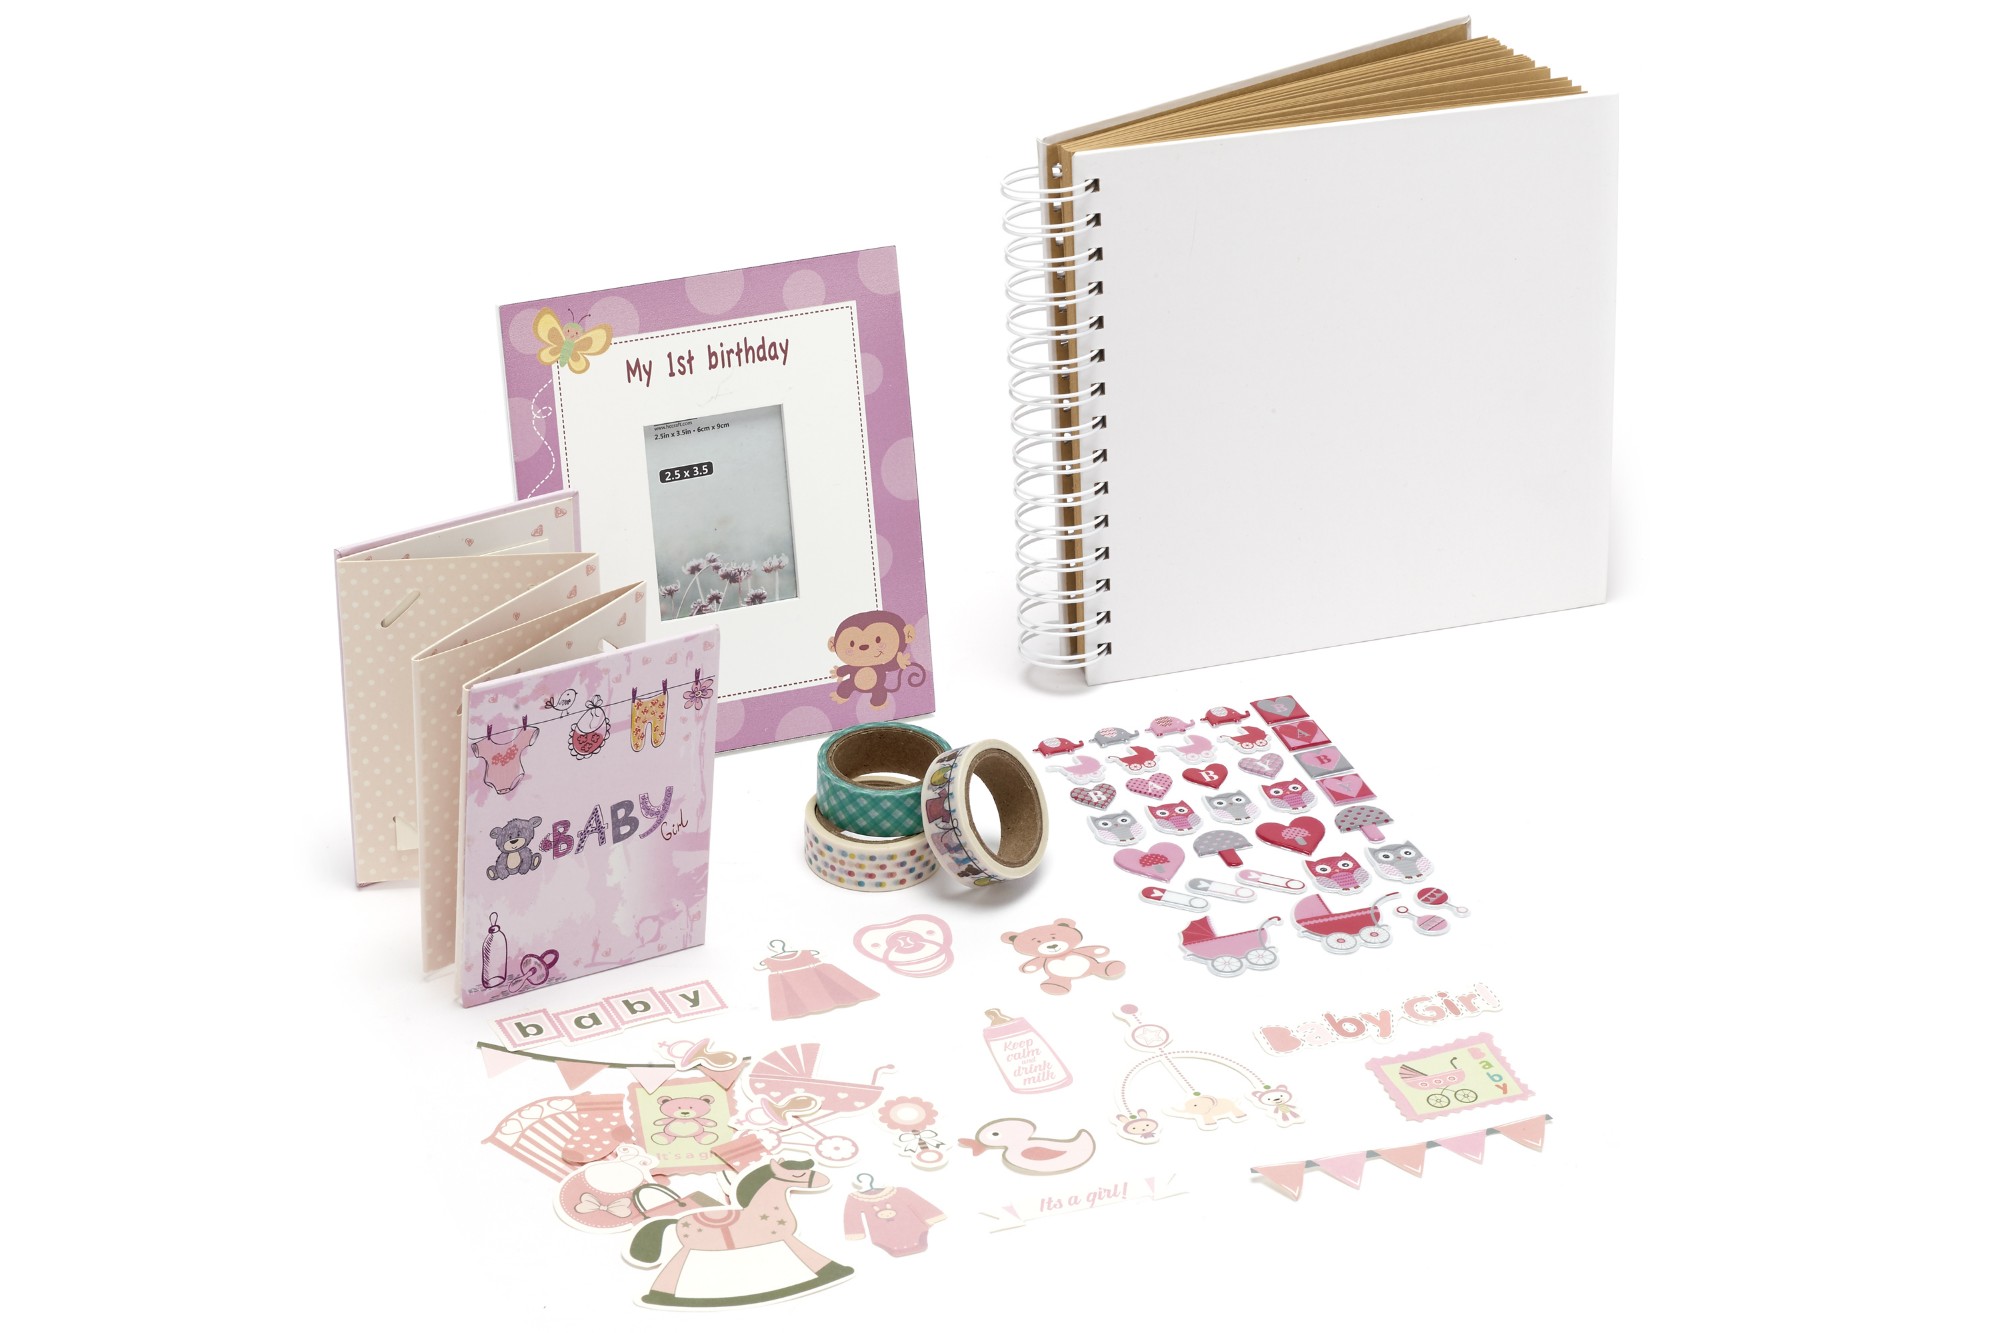 70100140638 FUJI Instax Baby 1st Year Bundle Accessory Pack for Mini Prints - Pink